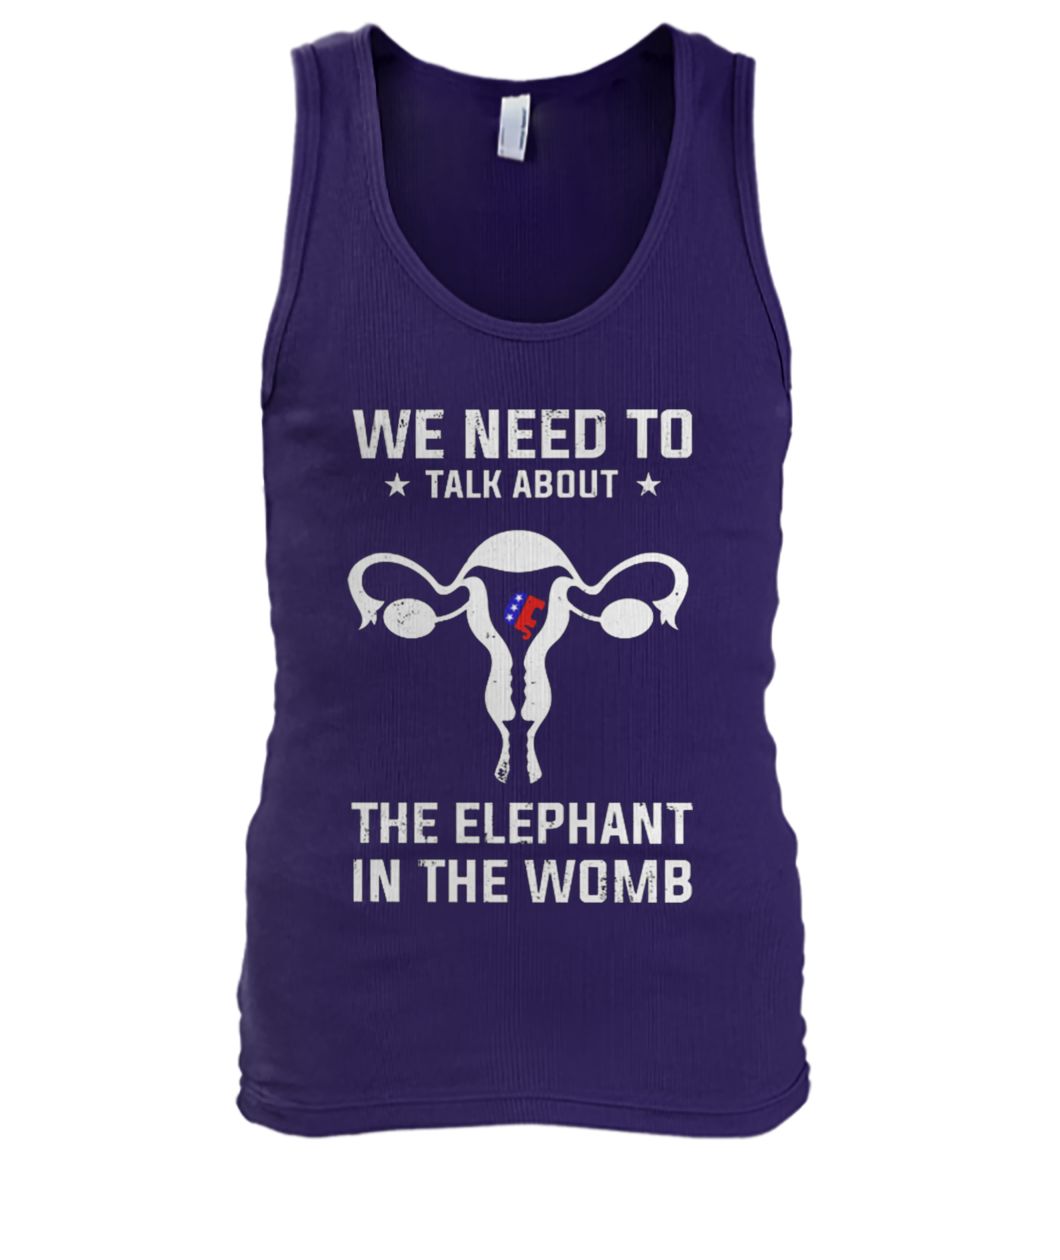 We need to talk about the elephant in the womb men's tank top